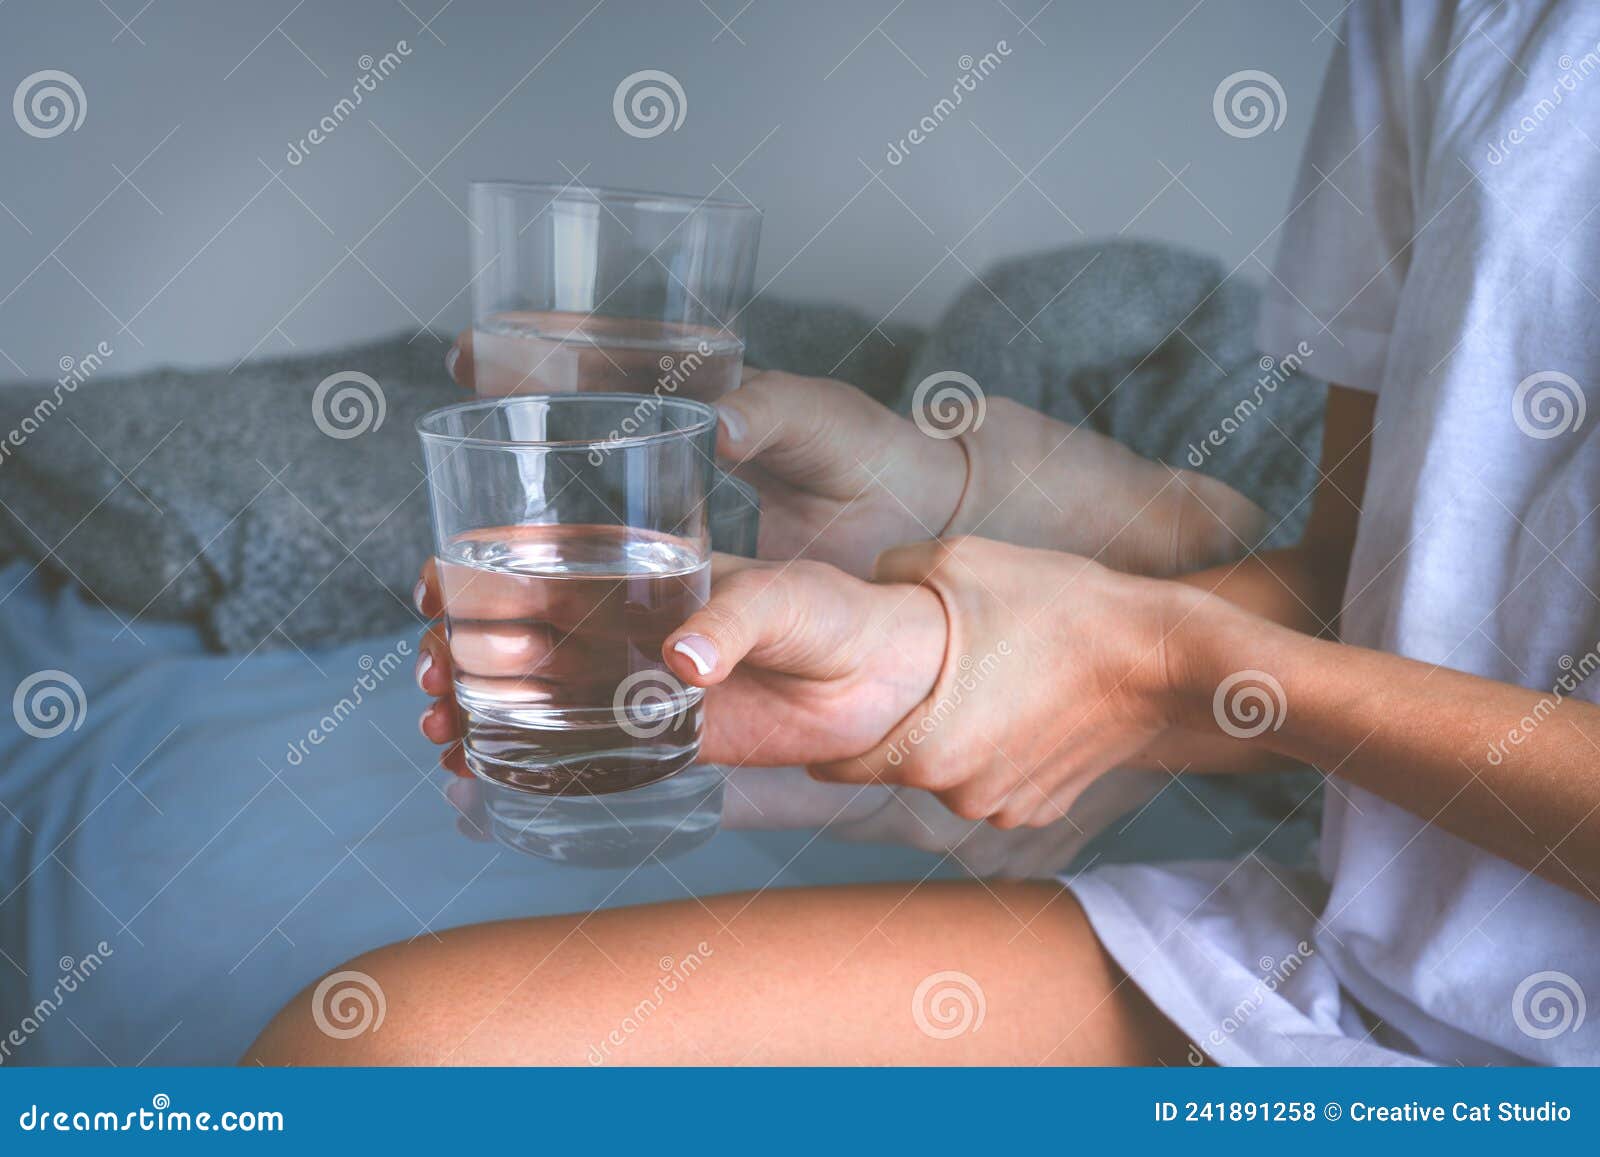 woman holding glass of water in shaky hands and suffering from parkinson& x27;s disease symptoms or essential tremor.